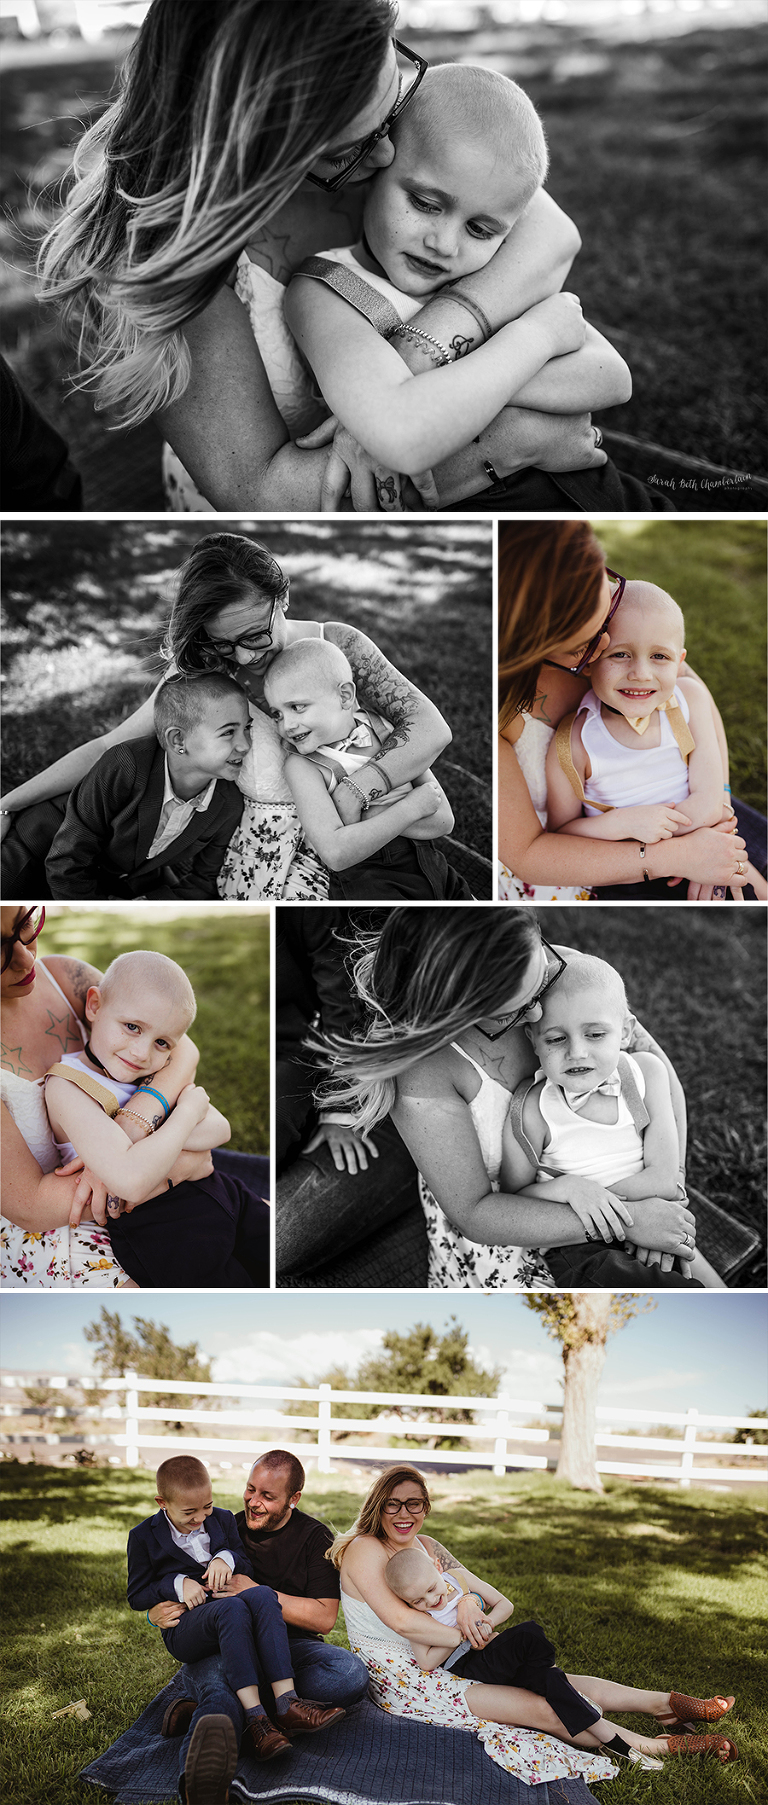 Leukemia Fighter | Las Vegas Family Photographer | The Gold Hope Project | Volunteer Photographer | Childhood Cancer | Mother and Son